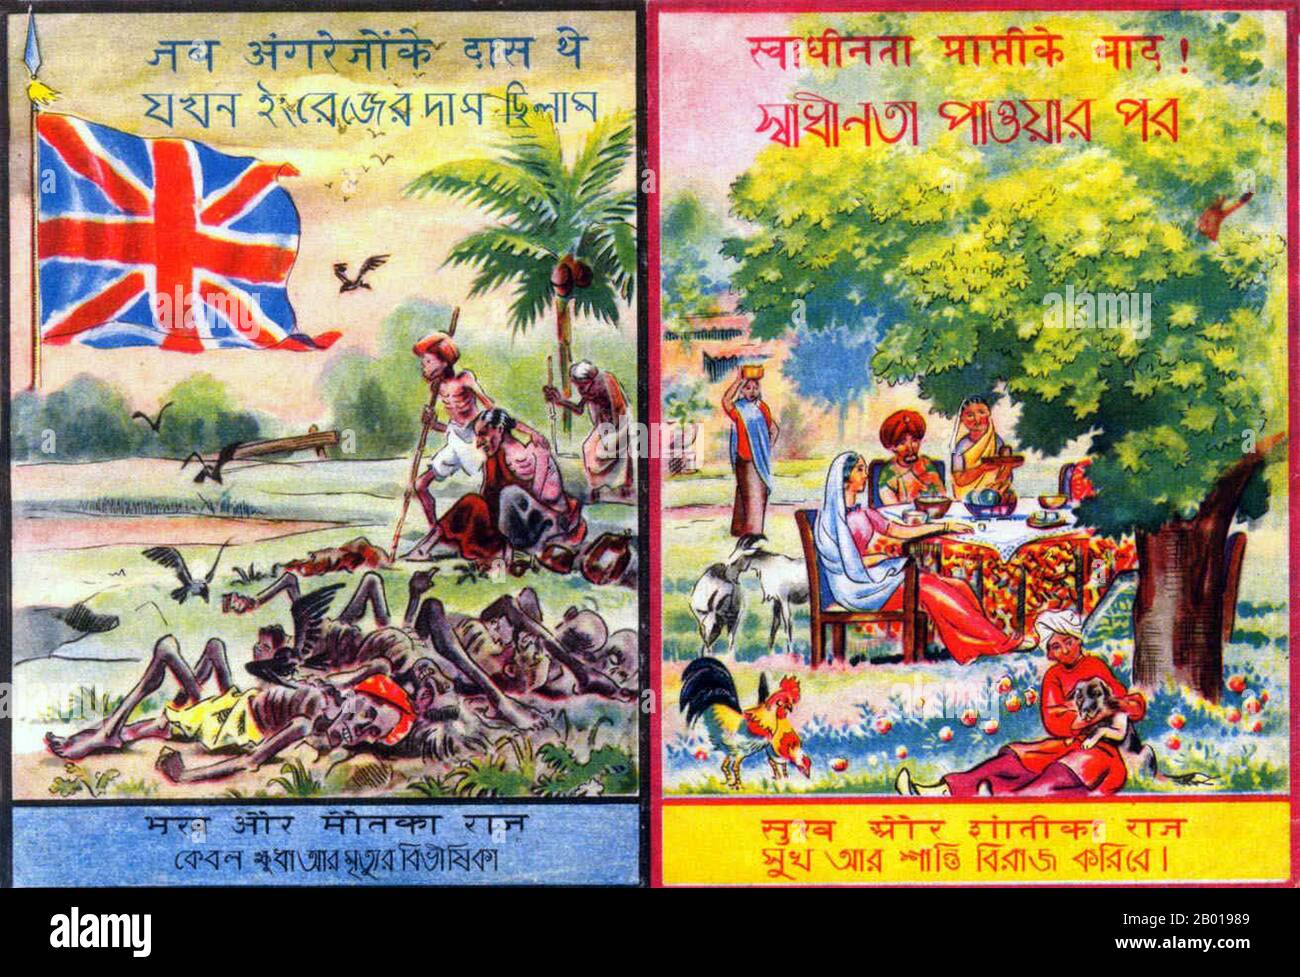 India: Japanese WWII propaganda poster depicting the miseries of life under the British Raj and the prosperity attainable through independence, c. 1941-1945.  China Burma India Theatre (CBI) was the name used by the United States Army for its forces operating in conjunction with British and Chinese Allied air and land forces in China, Burma, and India during World War II. Well-known US units in this theatre included the Flying Tigers, transport and bomber units flying the Hump, and the 1st Air Commando Group, the engineers who built Ledo Road. Stock Photo